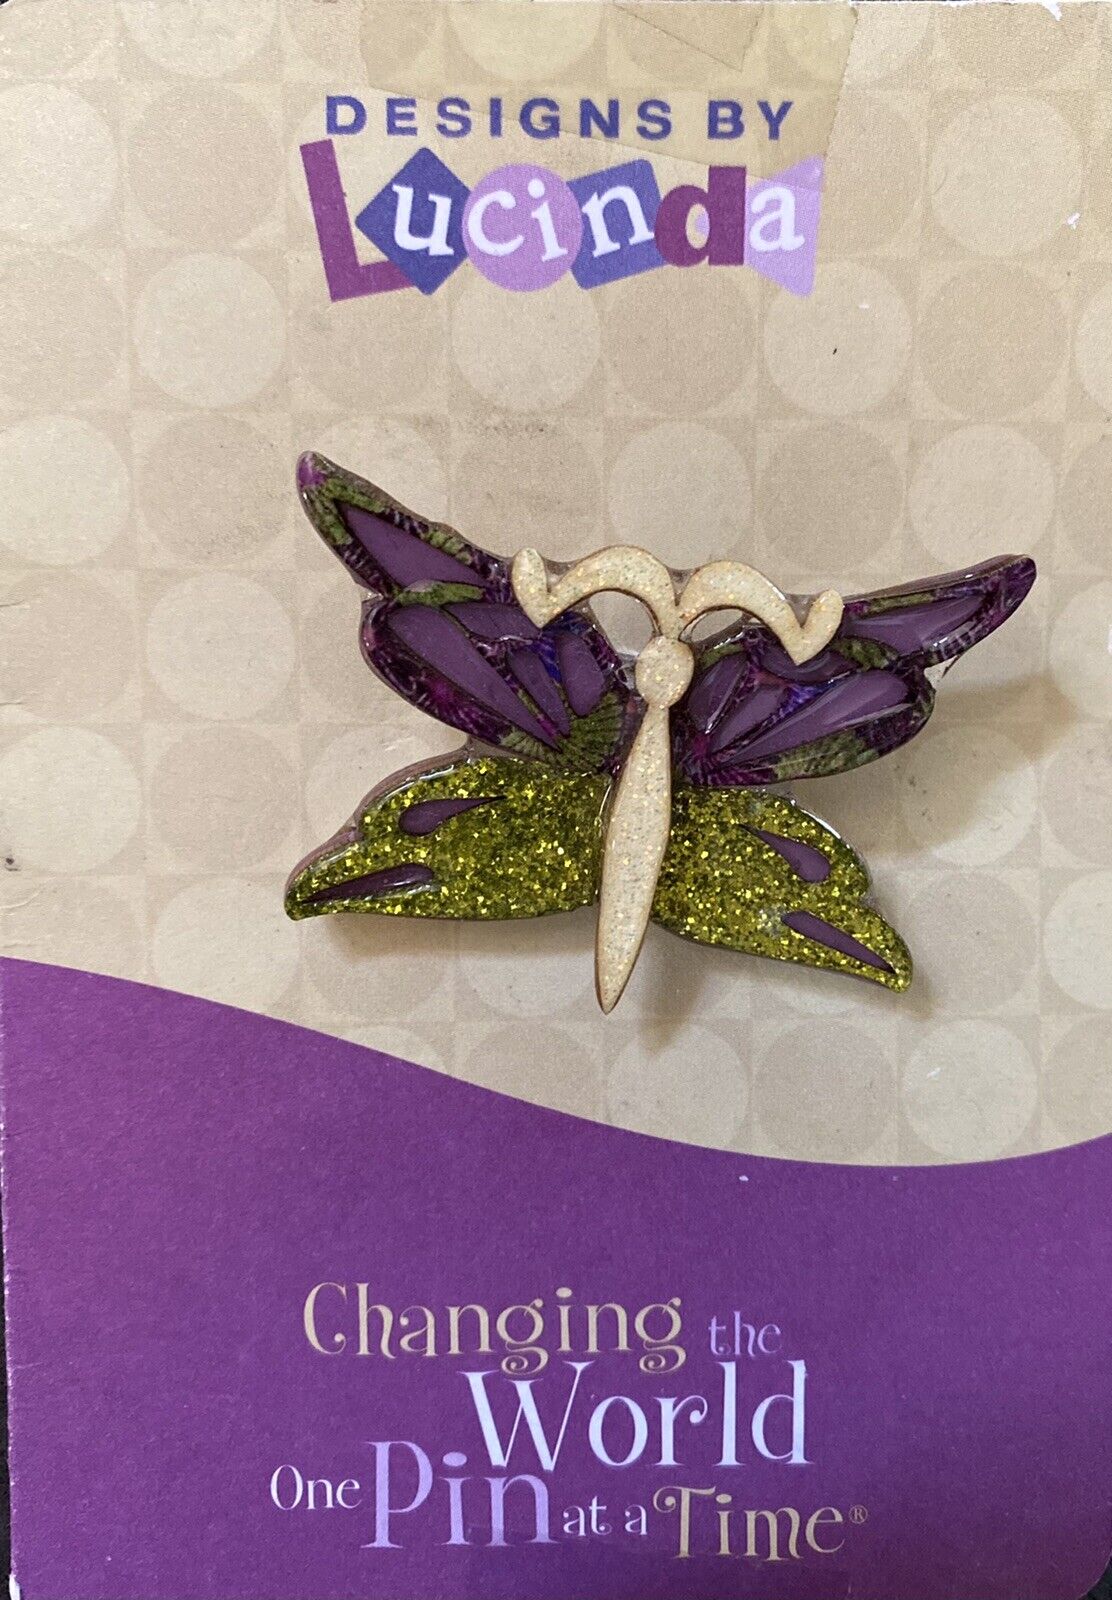 Designs By Lucinda Butterfly Pin On Card Purple/green Glitter Vintage